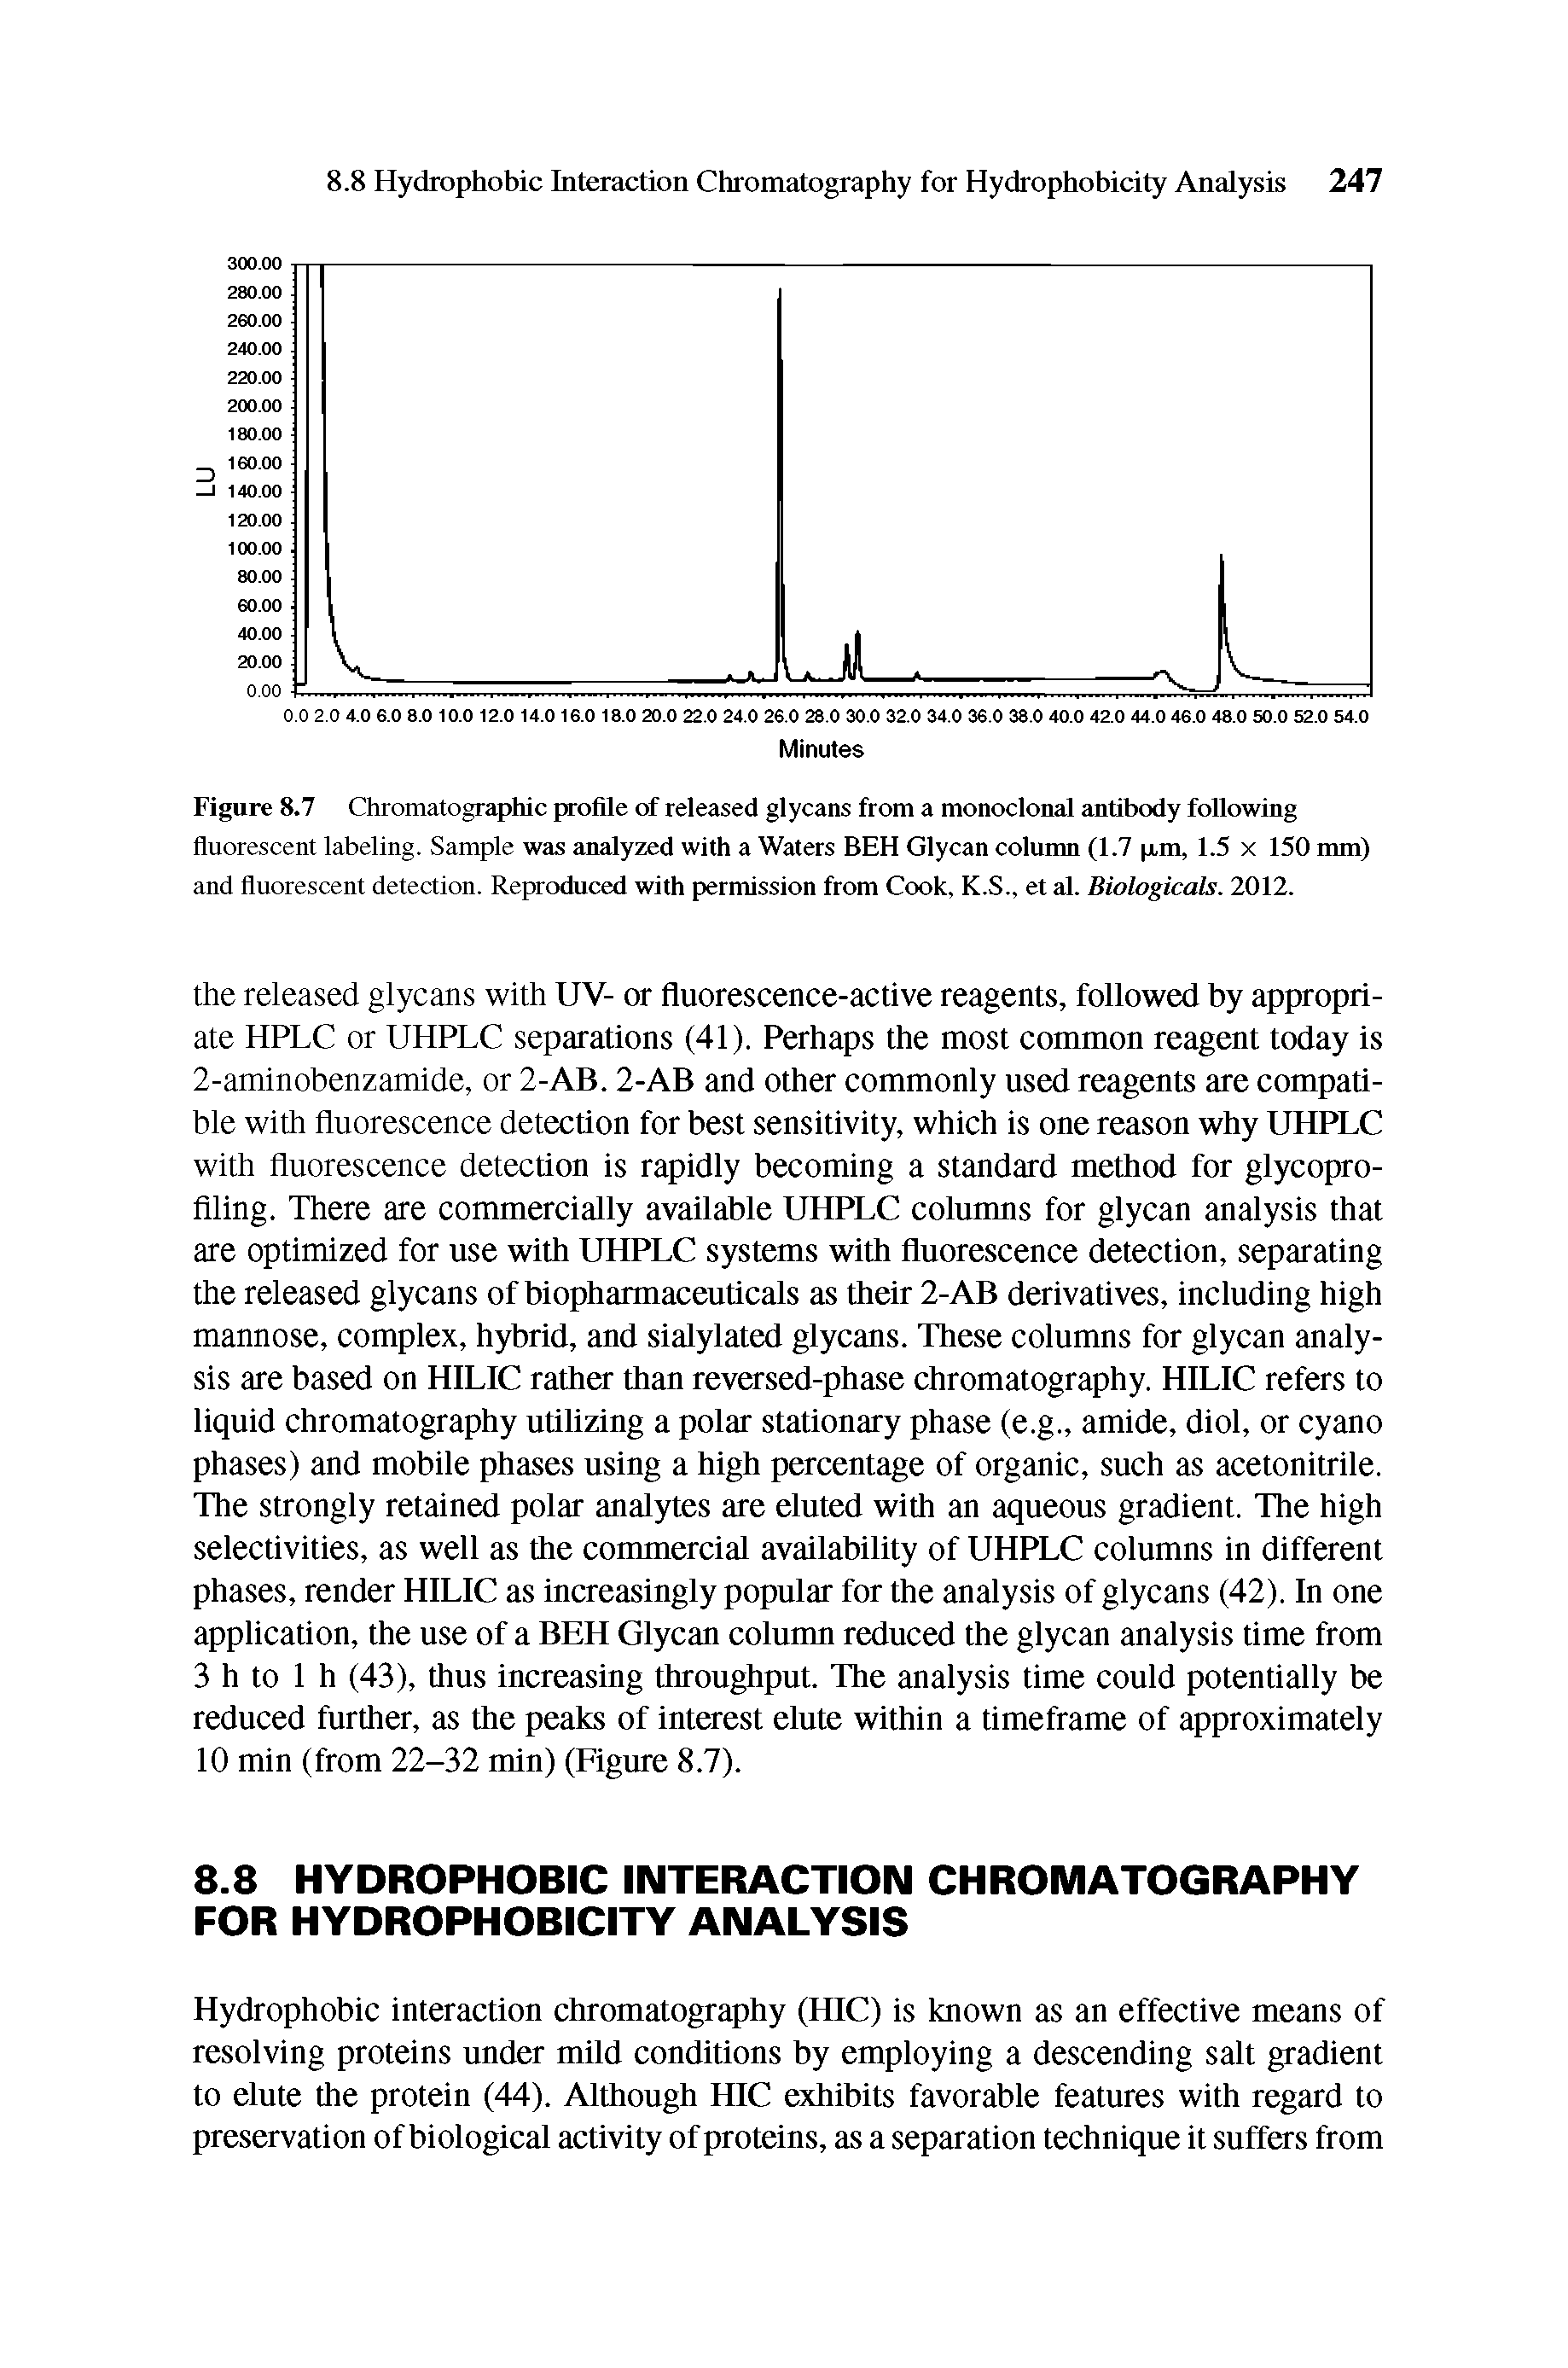 Figure 8.7 Chromatographic profile of released glycans from a monoclonal antibody following fluorescent labeling. Sample was analyzed with a Waters BEH Glycan colunm (1.7 jim, 1.5 x 150 mm) and fluorescent detection. Reproduced with permission from Cook, K.S., et al. Biologicals. 2012.